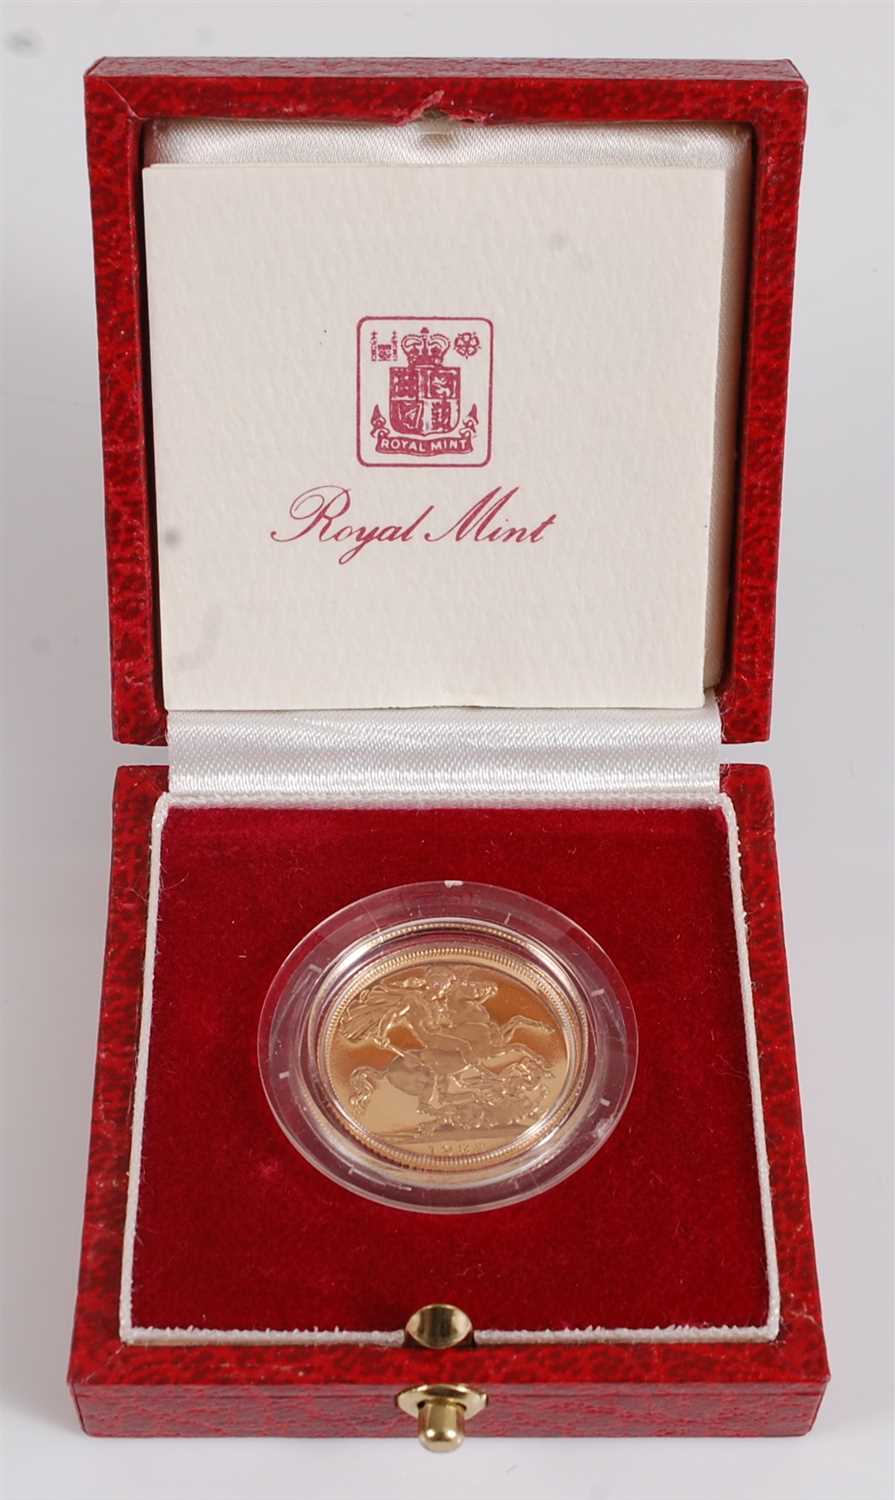 Lot 2044 - Great Britain, a cased 1983 gold proof...